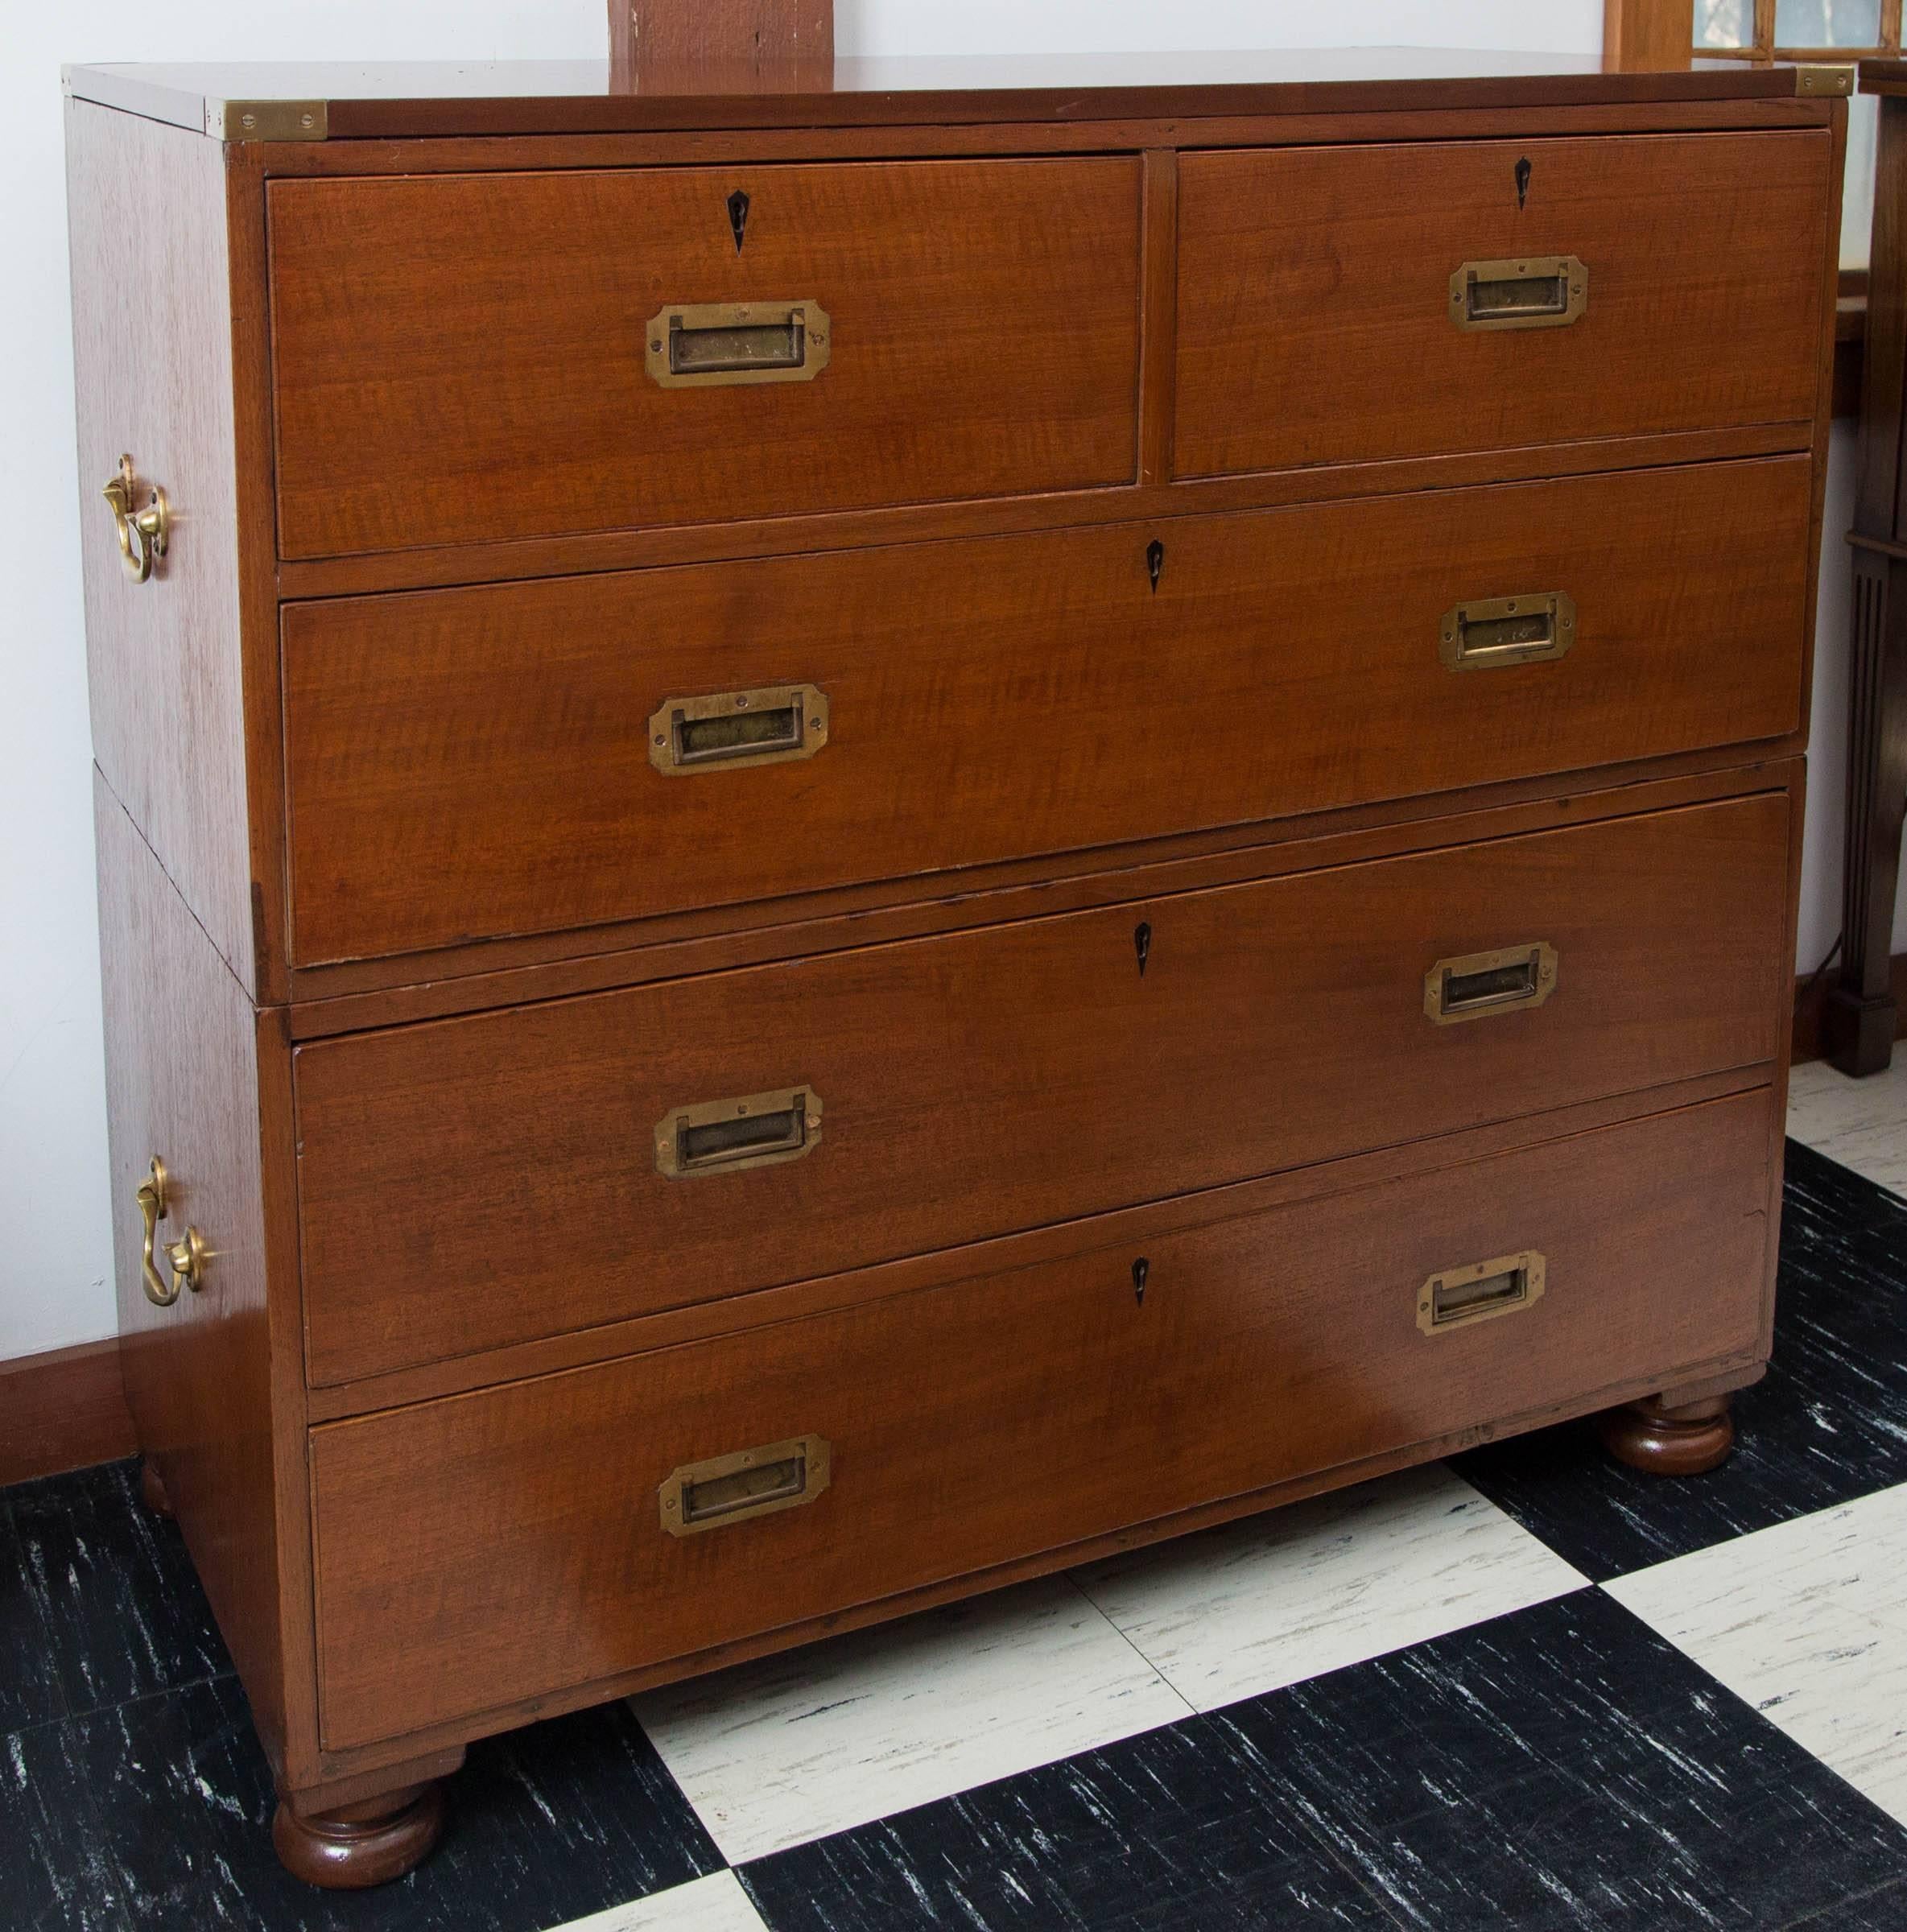 Two-piece English teak campaign chest of drawers with brass handles on upper and lower sections. Chest rests on replaced bun feet.